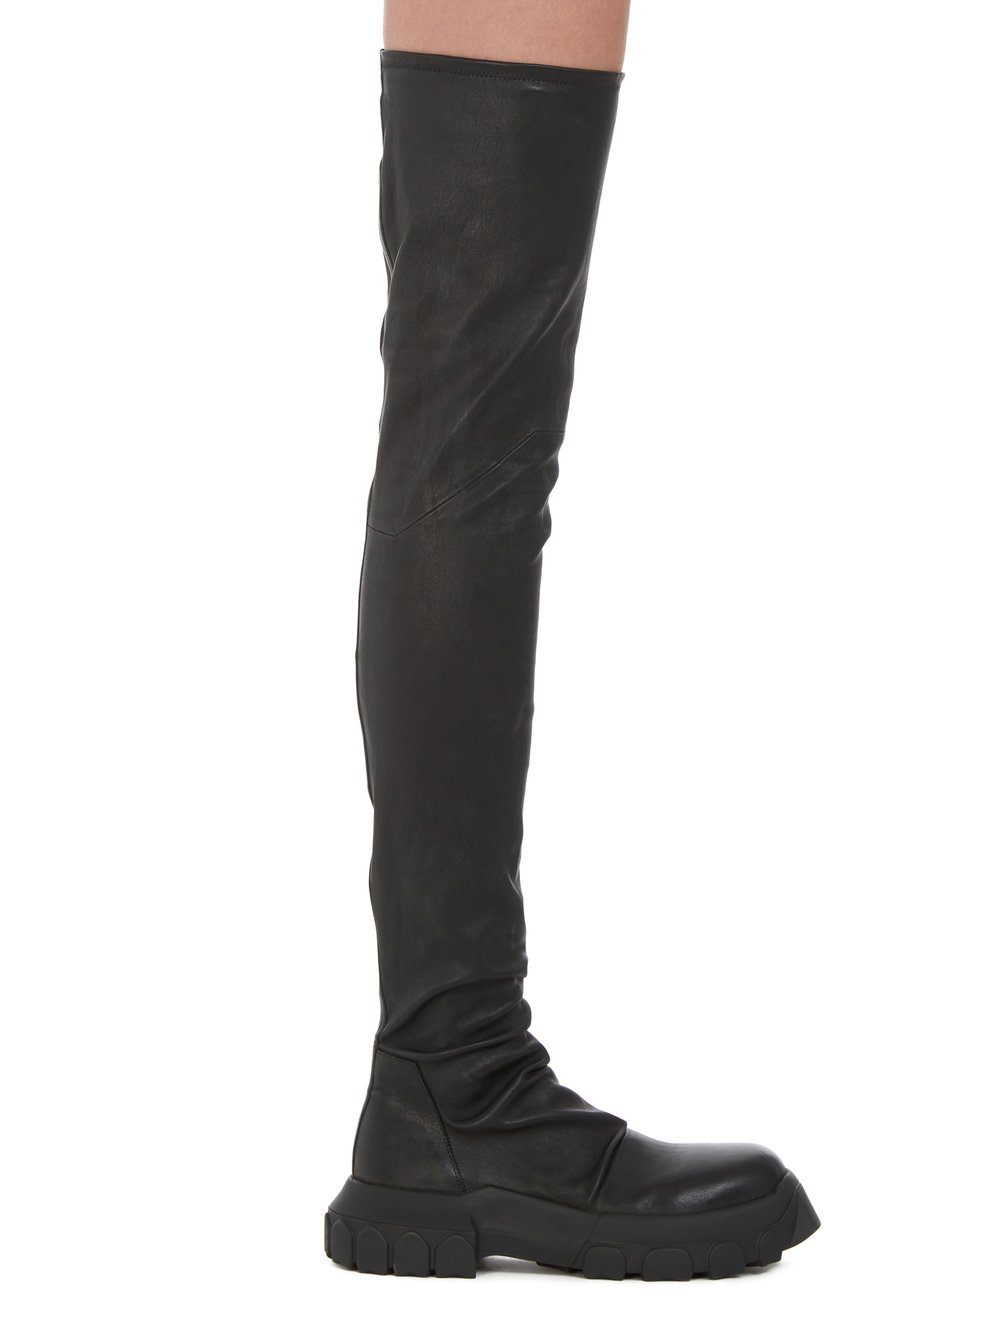 RICK OWENS FW23 LUXOR BOZO STOCKING TRACTOR IN BLACK STRETCH LAMB LEATHER